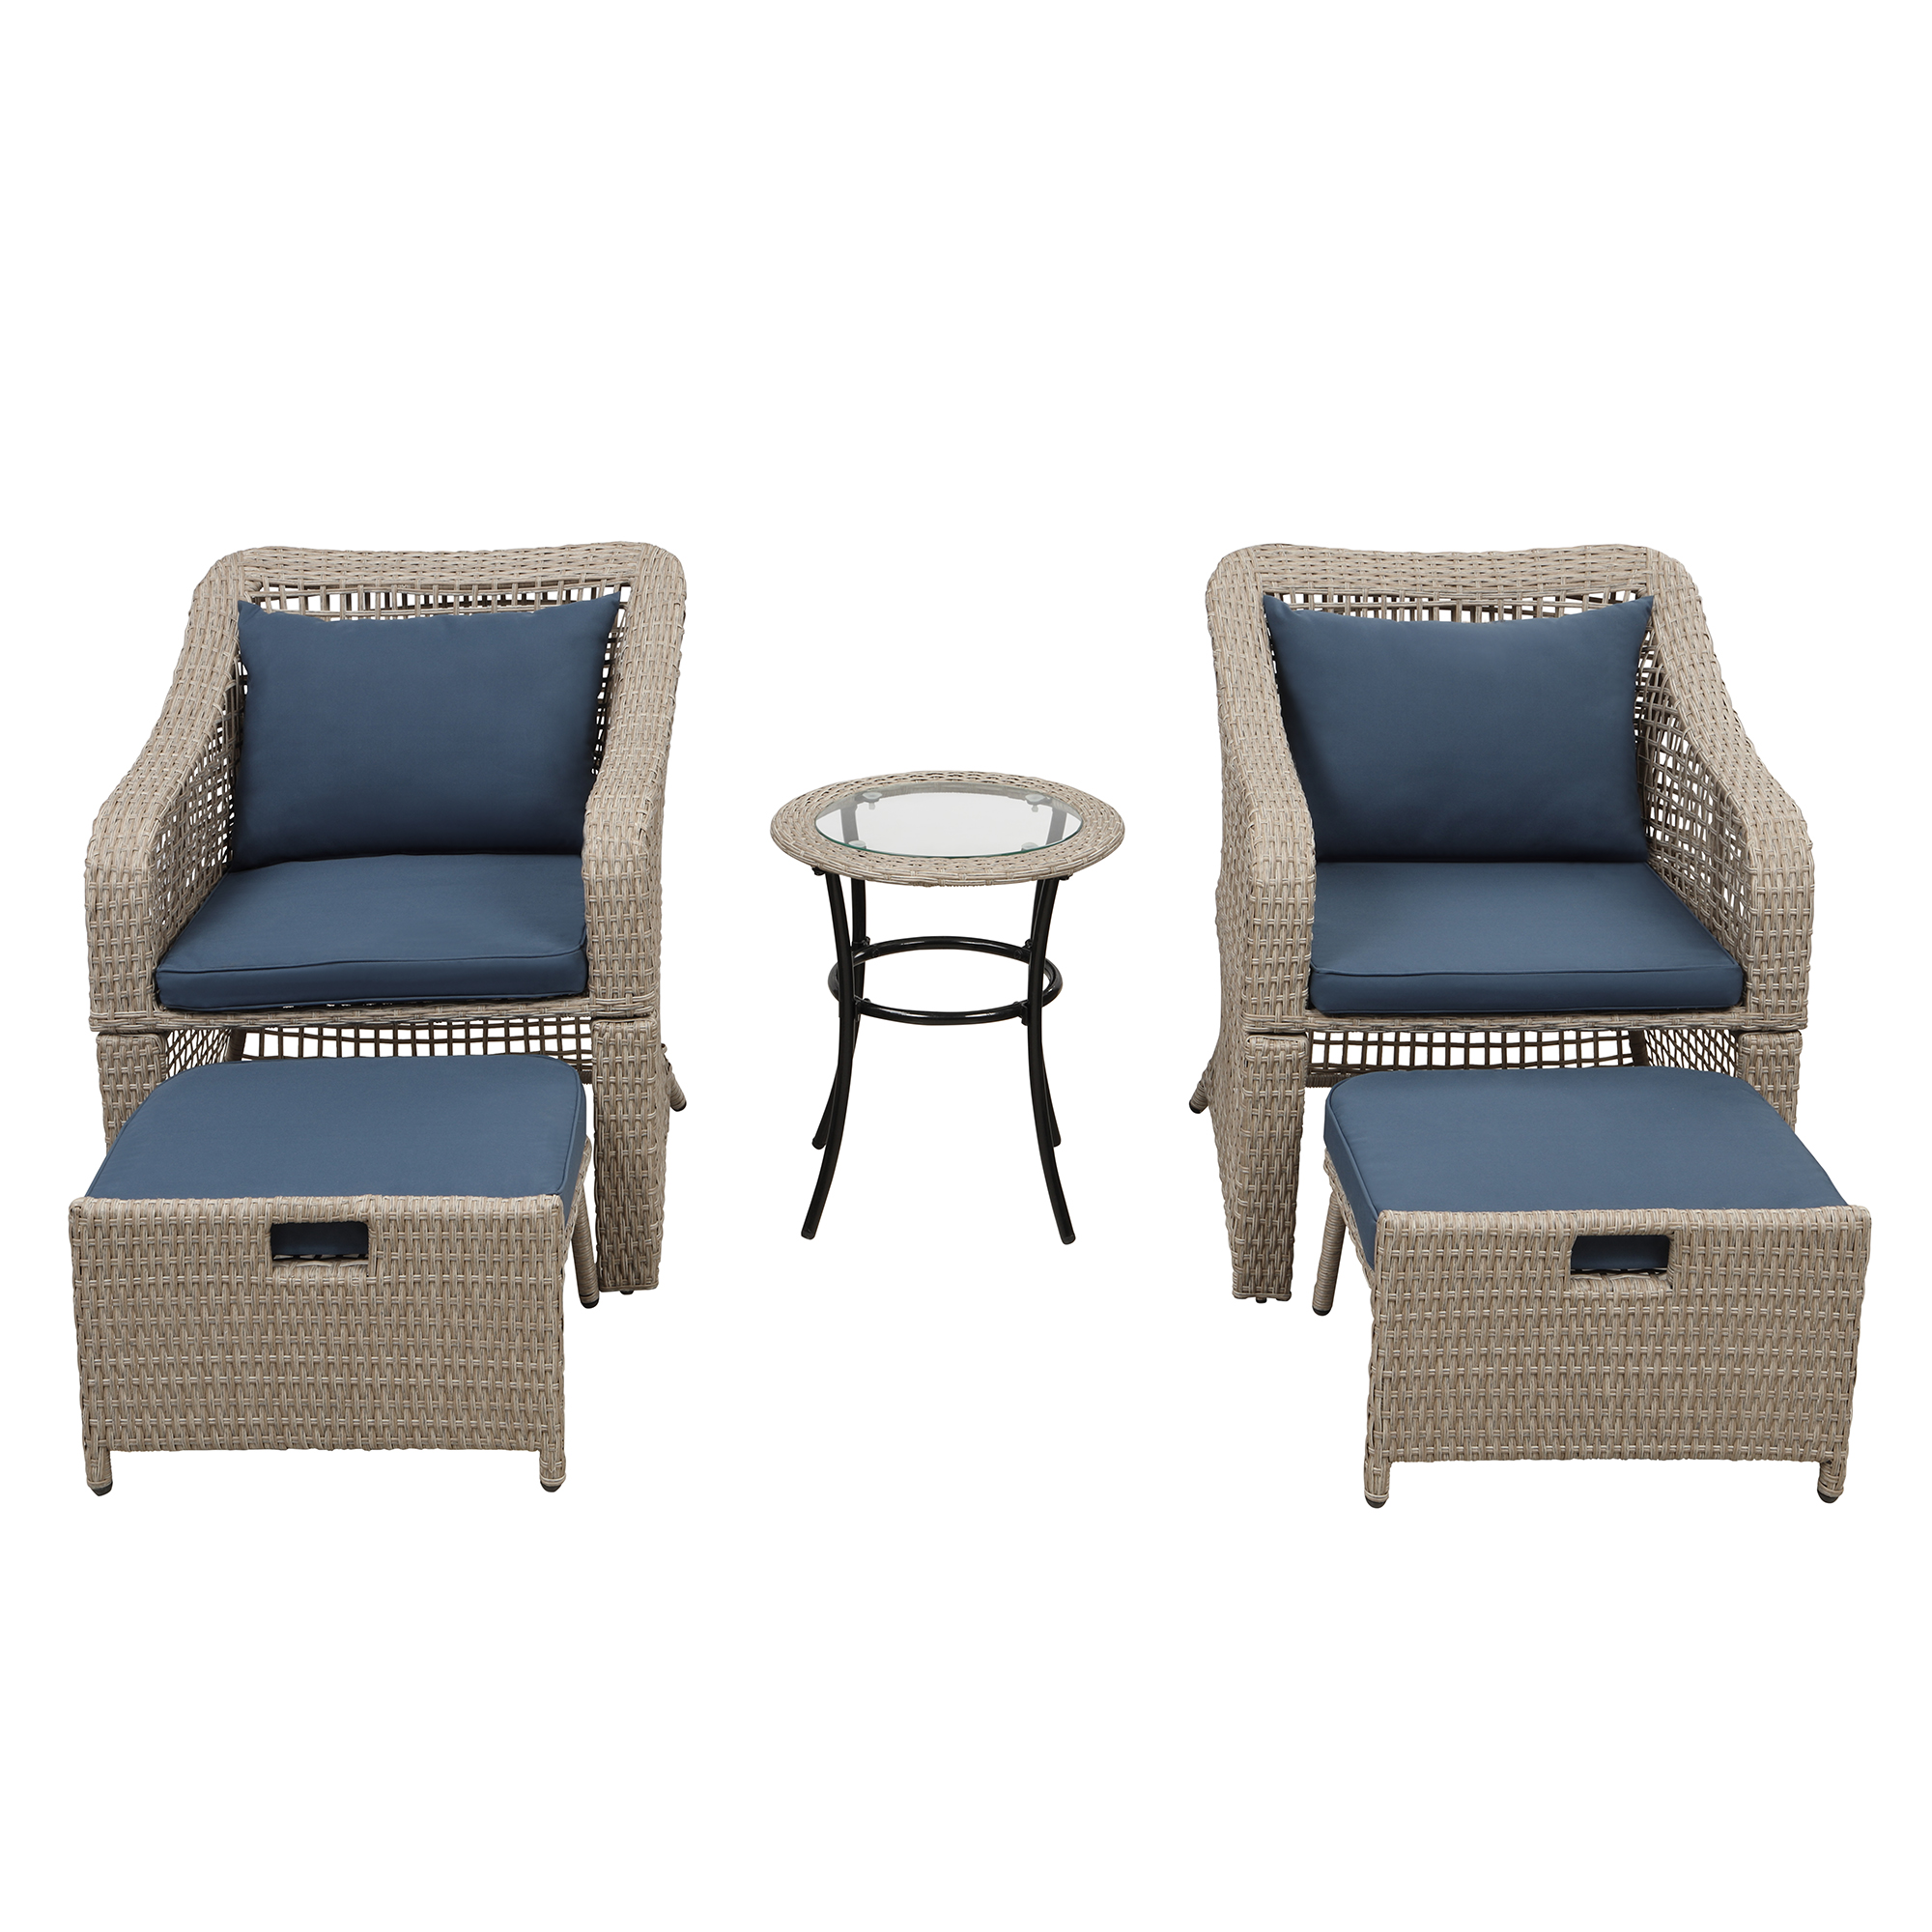 Patio Conversation Set, 5 Piece Outdoor Patio Furniture Sets with 2 Cushioned Chairs, 2 Ottoman, Glass Table, PE Wicker Rattan Outdoor Lounge Chair Chat Bistro Set for Backyard, Porch, Garden, LLL325 - image 2 of 9